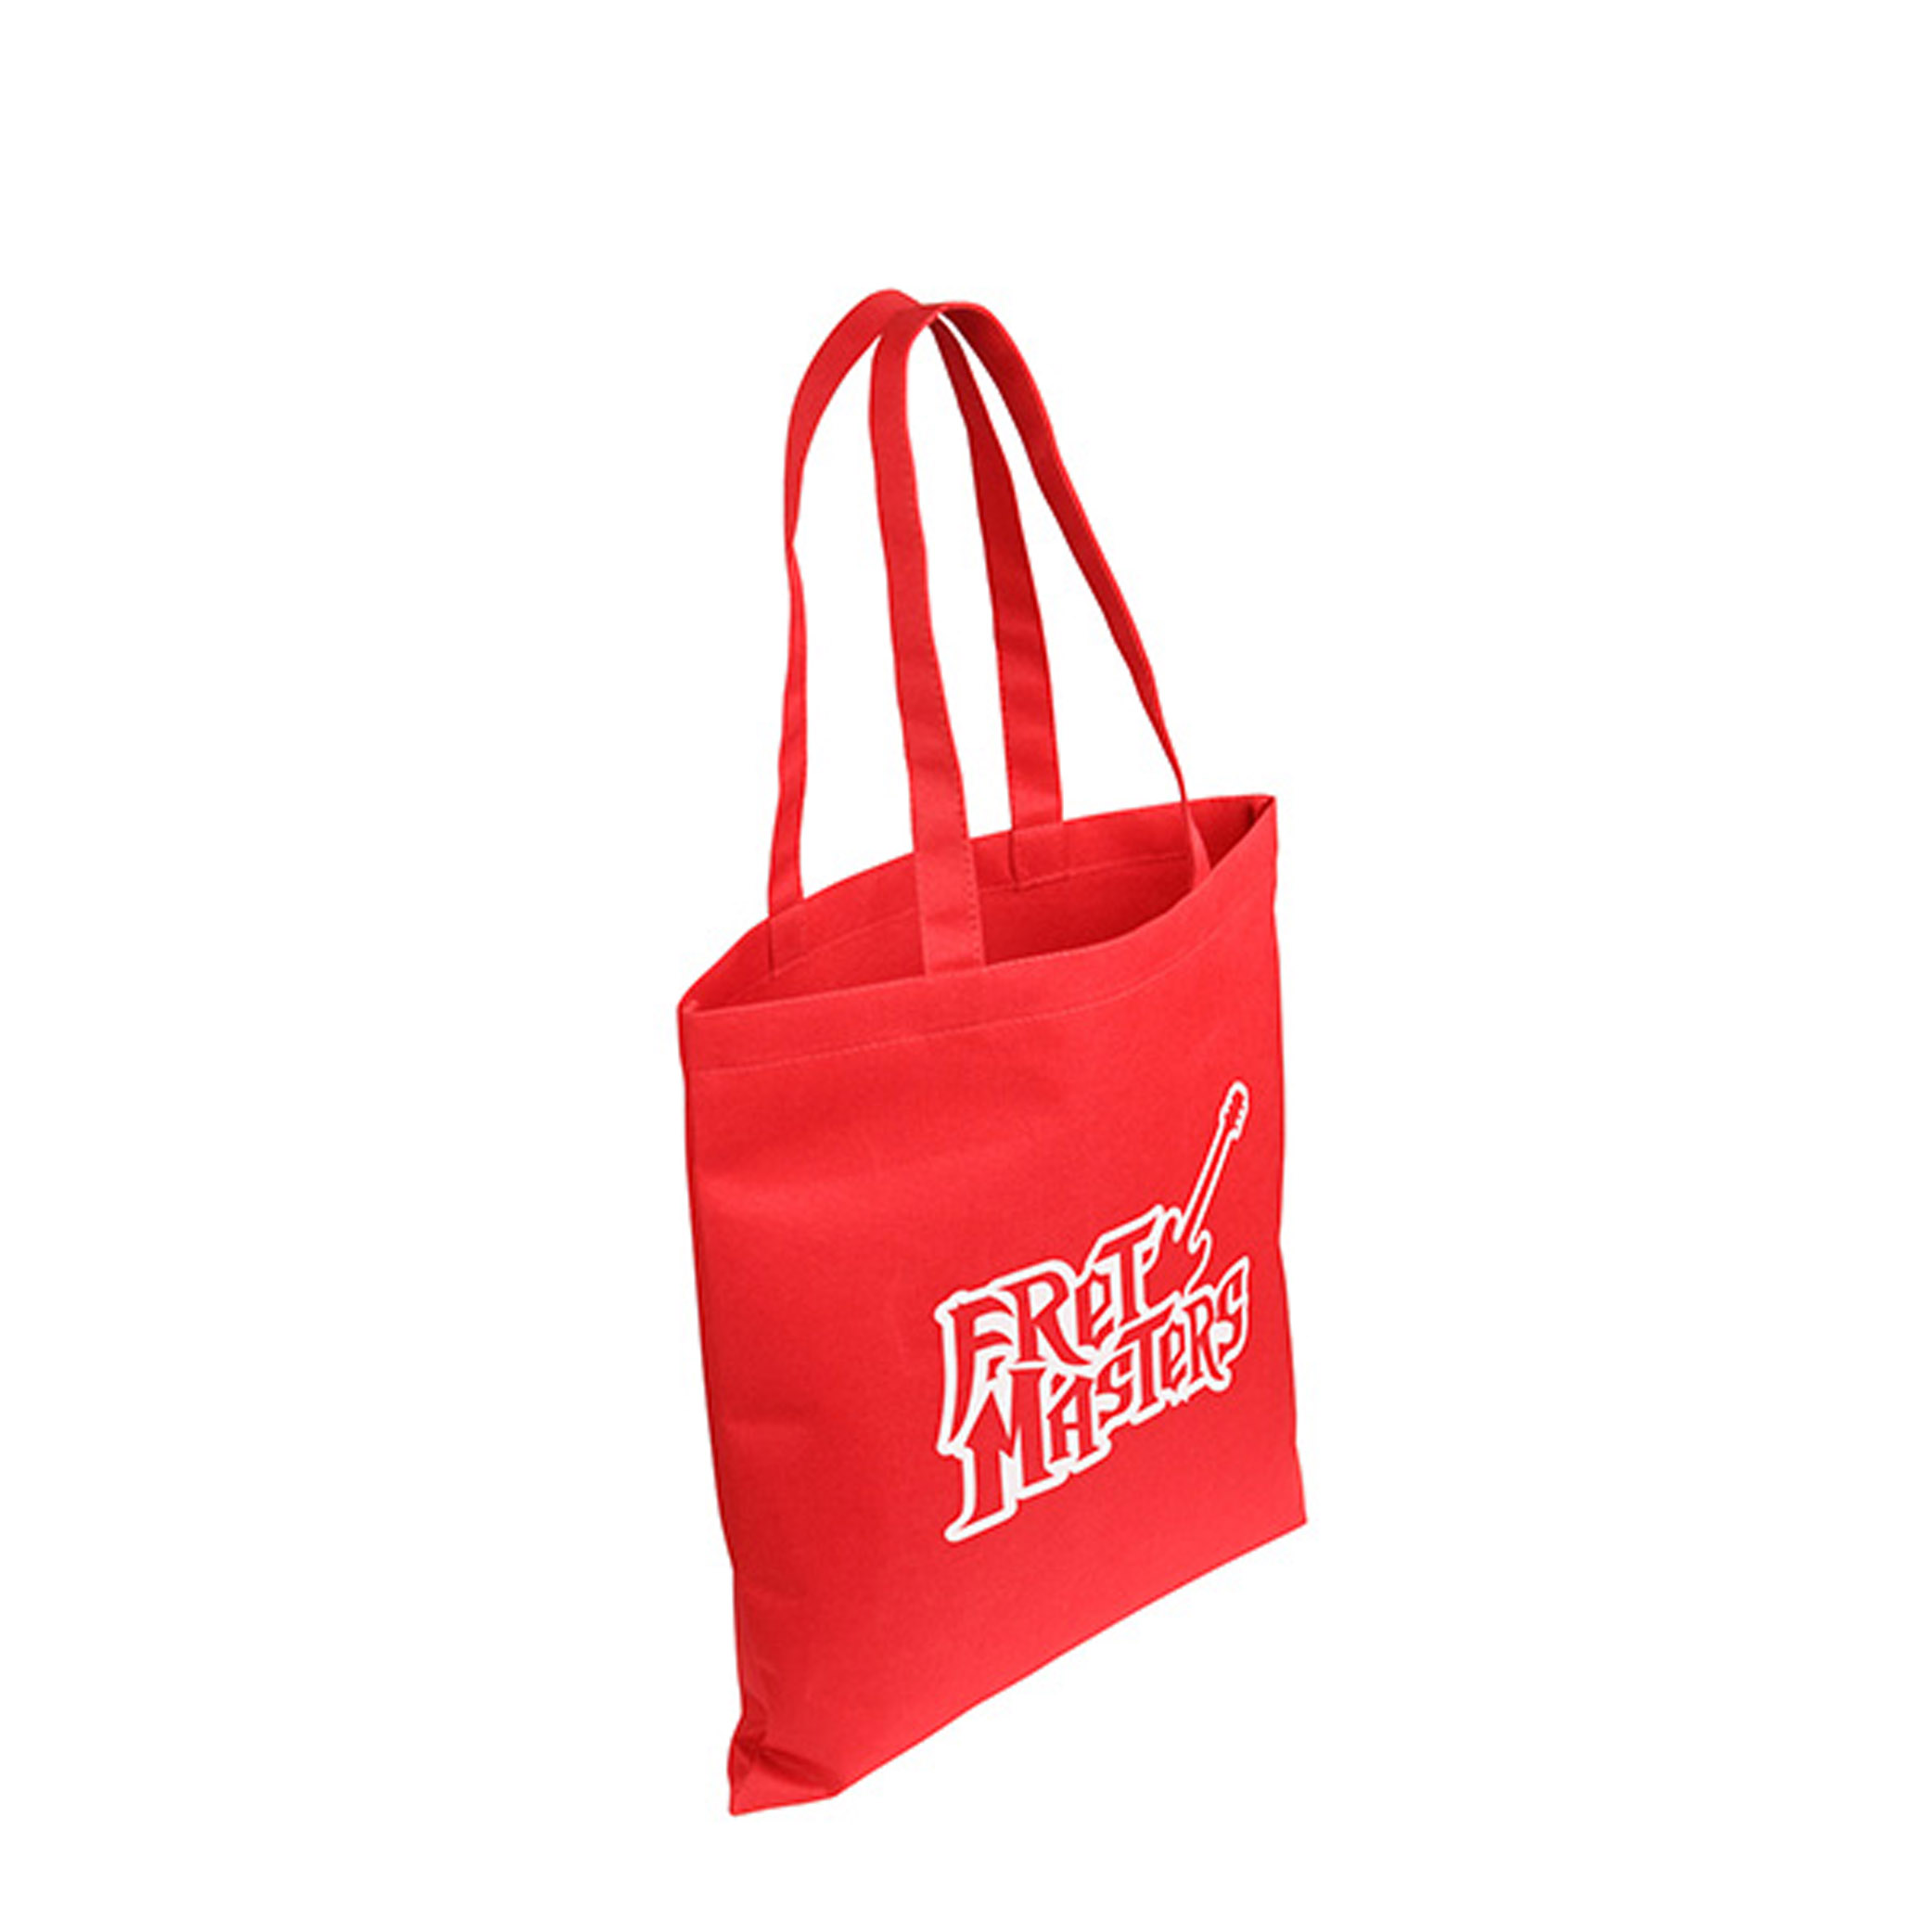 Gulf Breeze Recycled P.E.T. Tote Bag